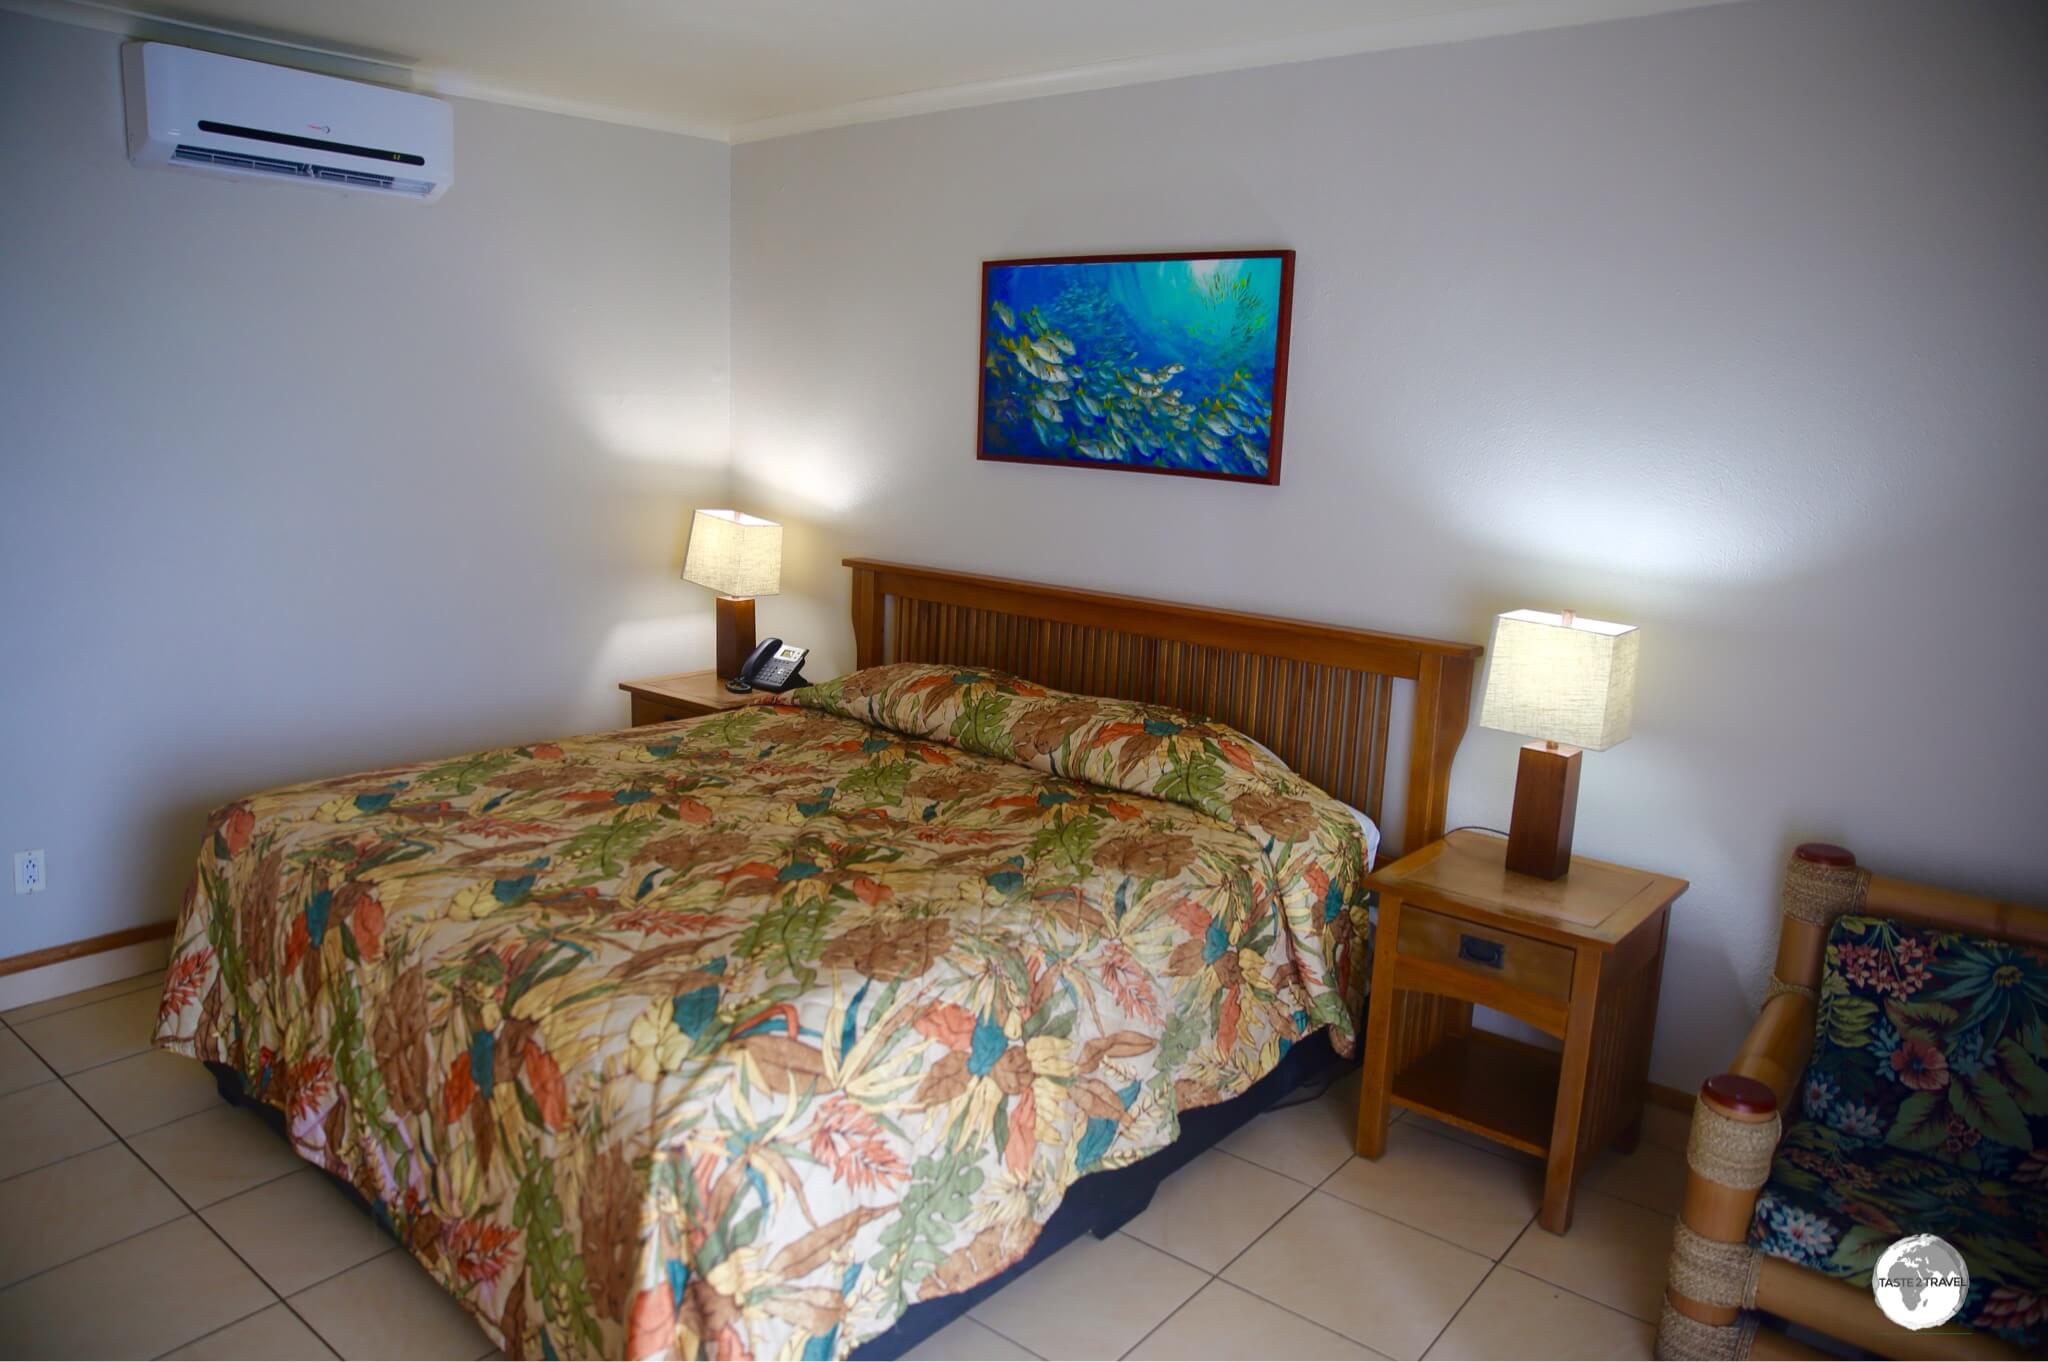 My comfortable room at 'Sadie's by the Sea' in Pago Pago. 